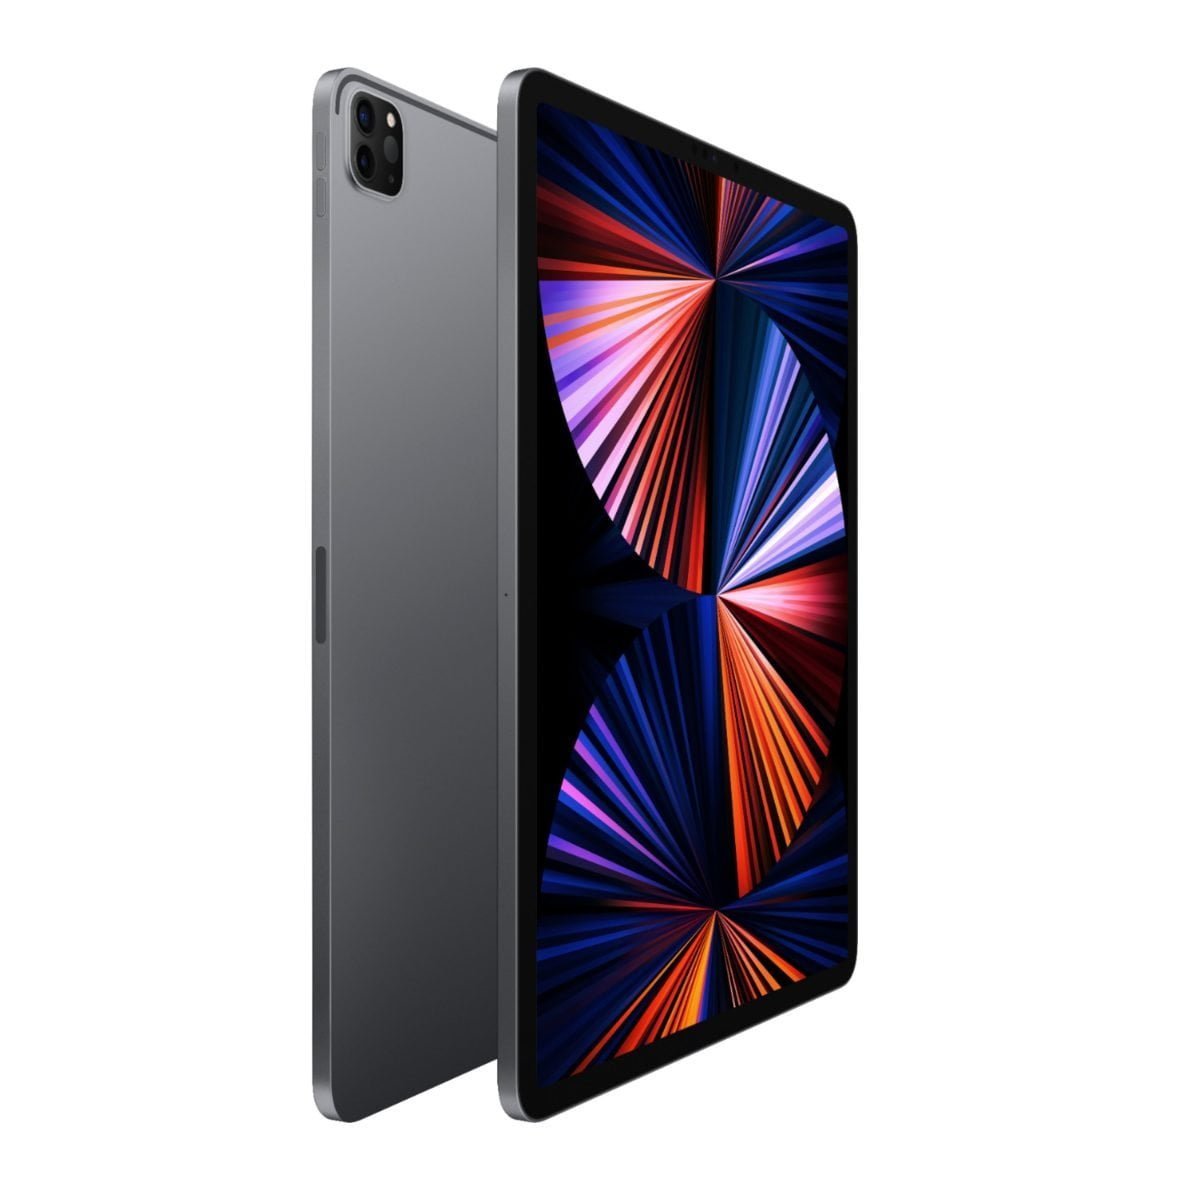 4264603Cv11D Scaled Apple &Lt;H1&Gt;Apple - 12.9-Inch Ipad Pro Latest Model With Wi-Fi - 256Gb - Space Gray&Lt;/H1&Gt; Ipad Pro Features The Powerful Apple M1 Chip For Next-Level Performance And All-Day Battery Life.an Immersive 12.9-Inch Liquid Retina Xdr Display For Viewing And Editing Hdr Photos And Videos. And A Front Camera With Center Stage Keeps You In Frame Automatically During Video Calls. Ipad Pro Has Pro Cameras And A Lidar Scanner For Stunning Photos, Videos, And Immersive Ar. Thunderbolt For Connecting To High-Performance Accessories. And You Can Add Apple Pencil For Note-Taking, Drawing, And Marking Up Documents, And The Magic Keyboard For A Responsive Typing Experience And Trackpad. Ipad Pro Apple 12.9-Inch Ipad Pro Latest Model With Wi-Fi - 256Gb - Space Gray Mhnh3